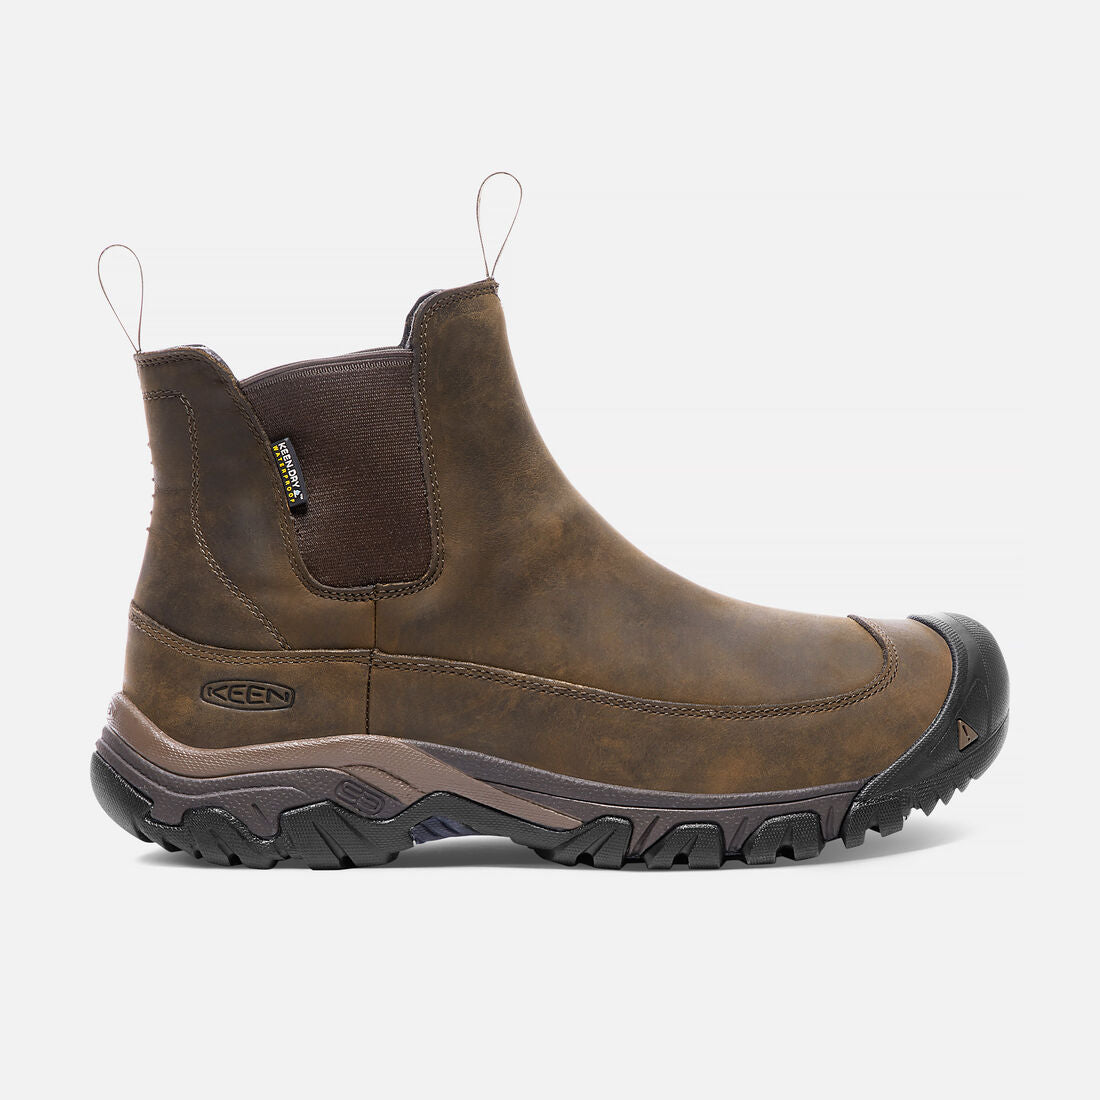 Anchorage Boot III (Men's size scale)